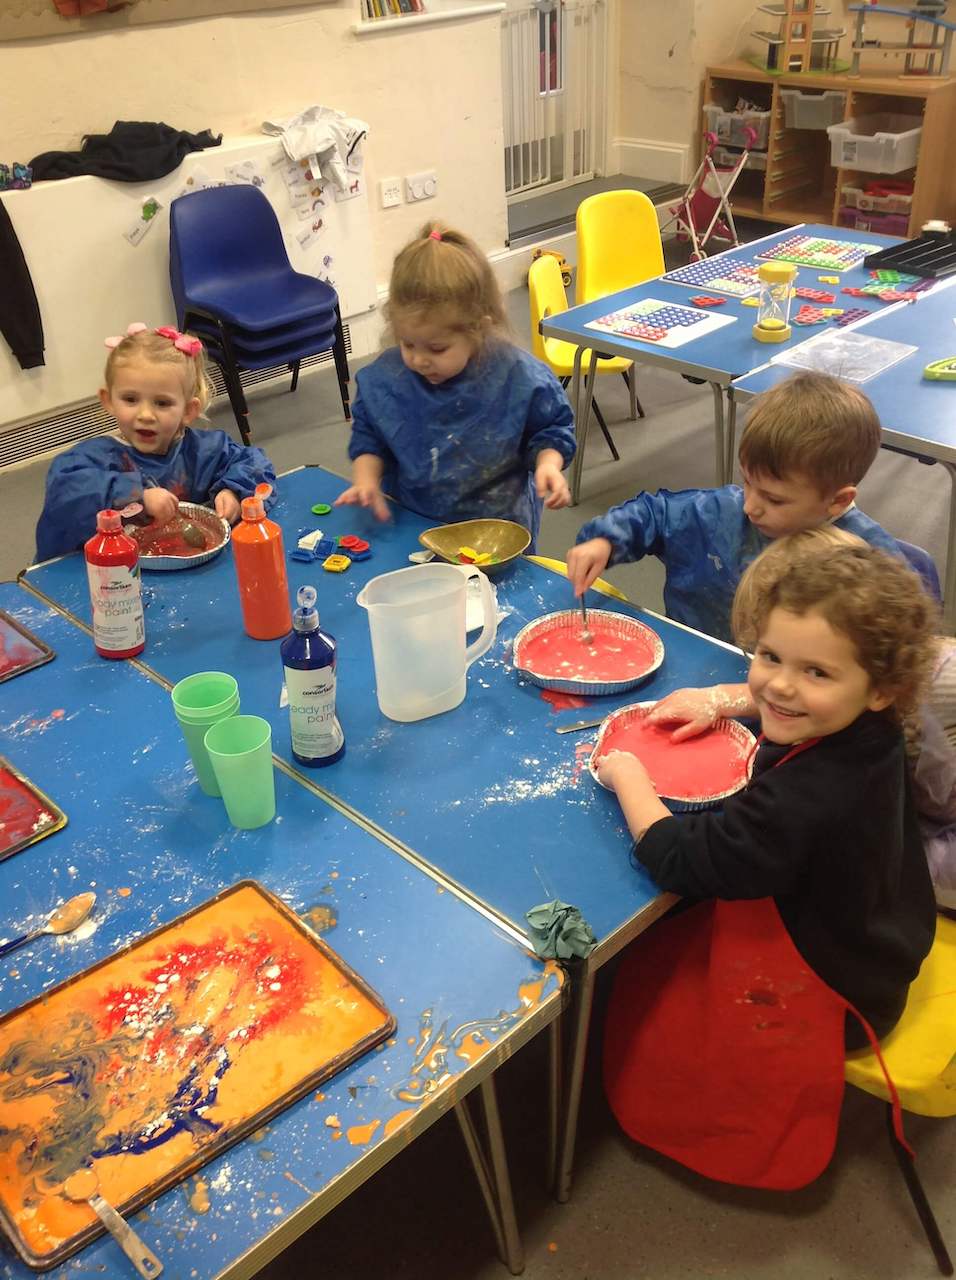 Four happy children, busy painting at a table